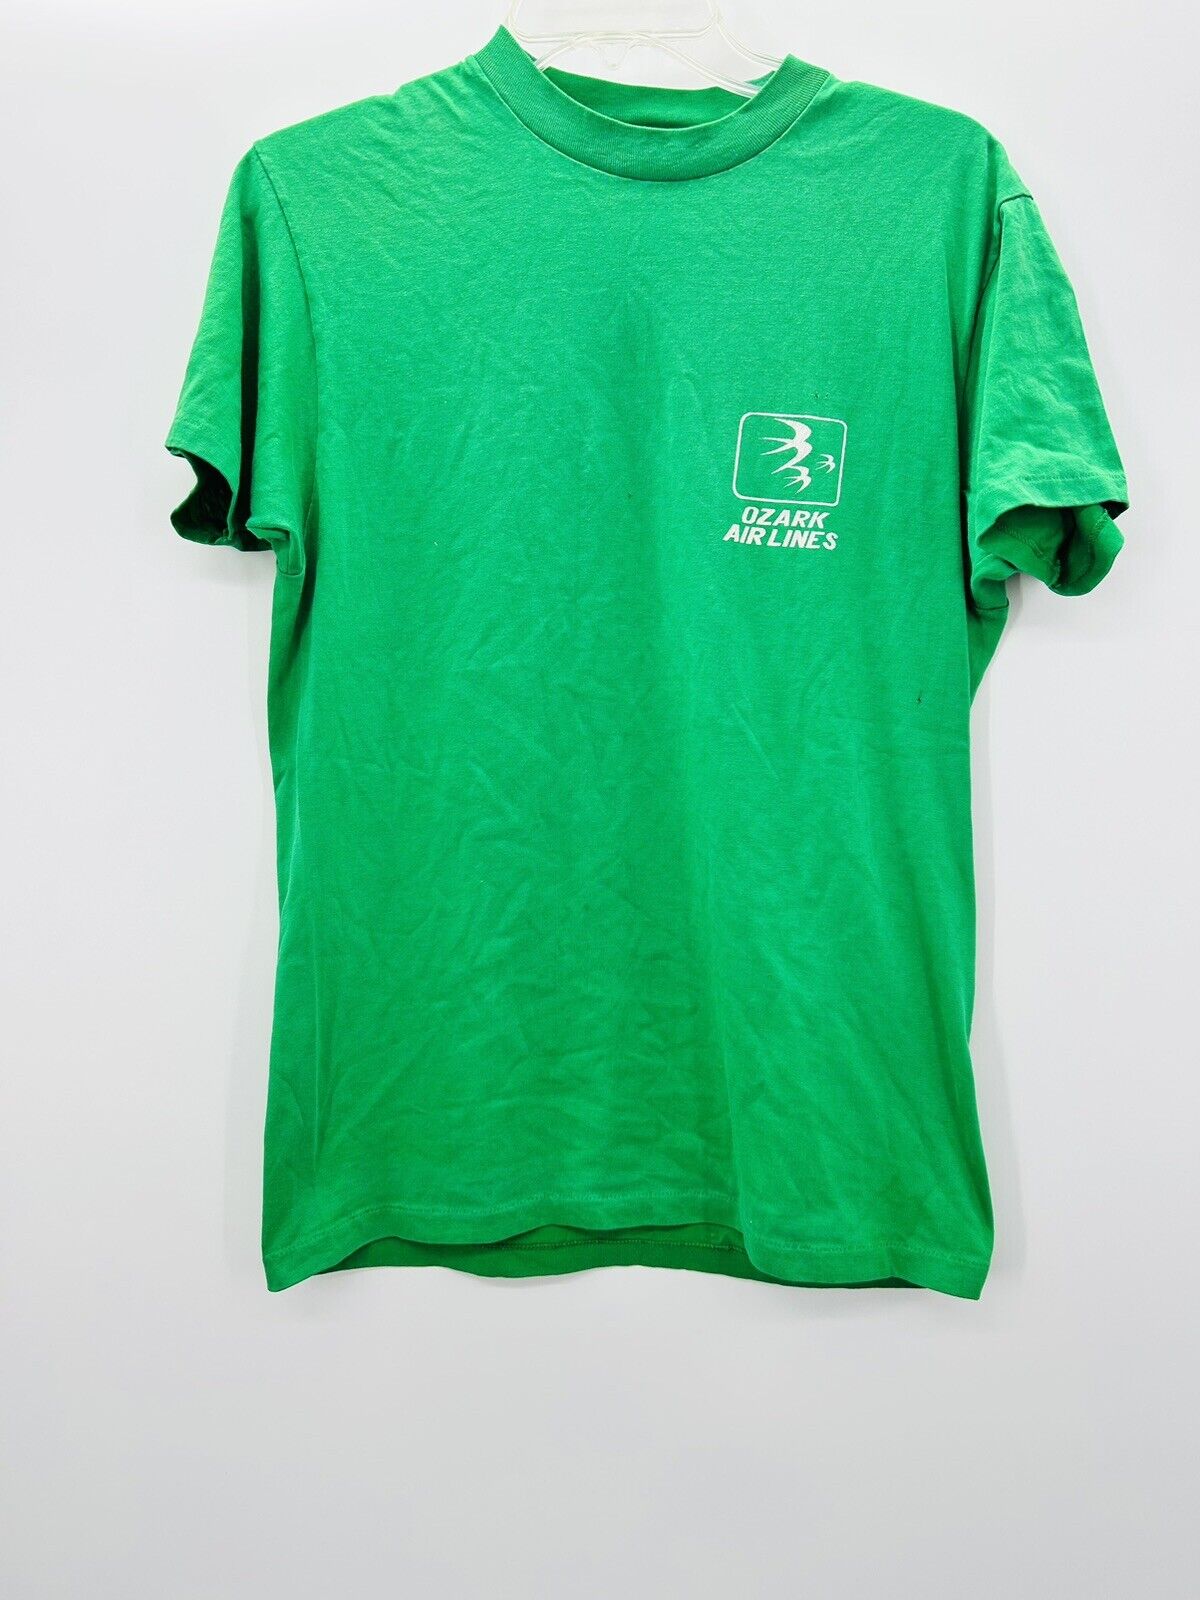 Ozark Airlines Hanes Green T-Shirt Size Large 42-44 USA